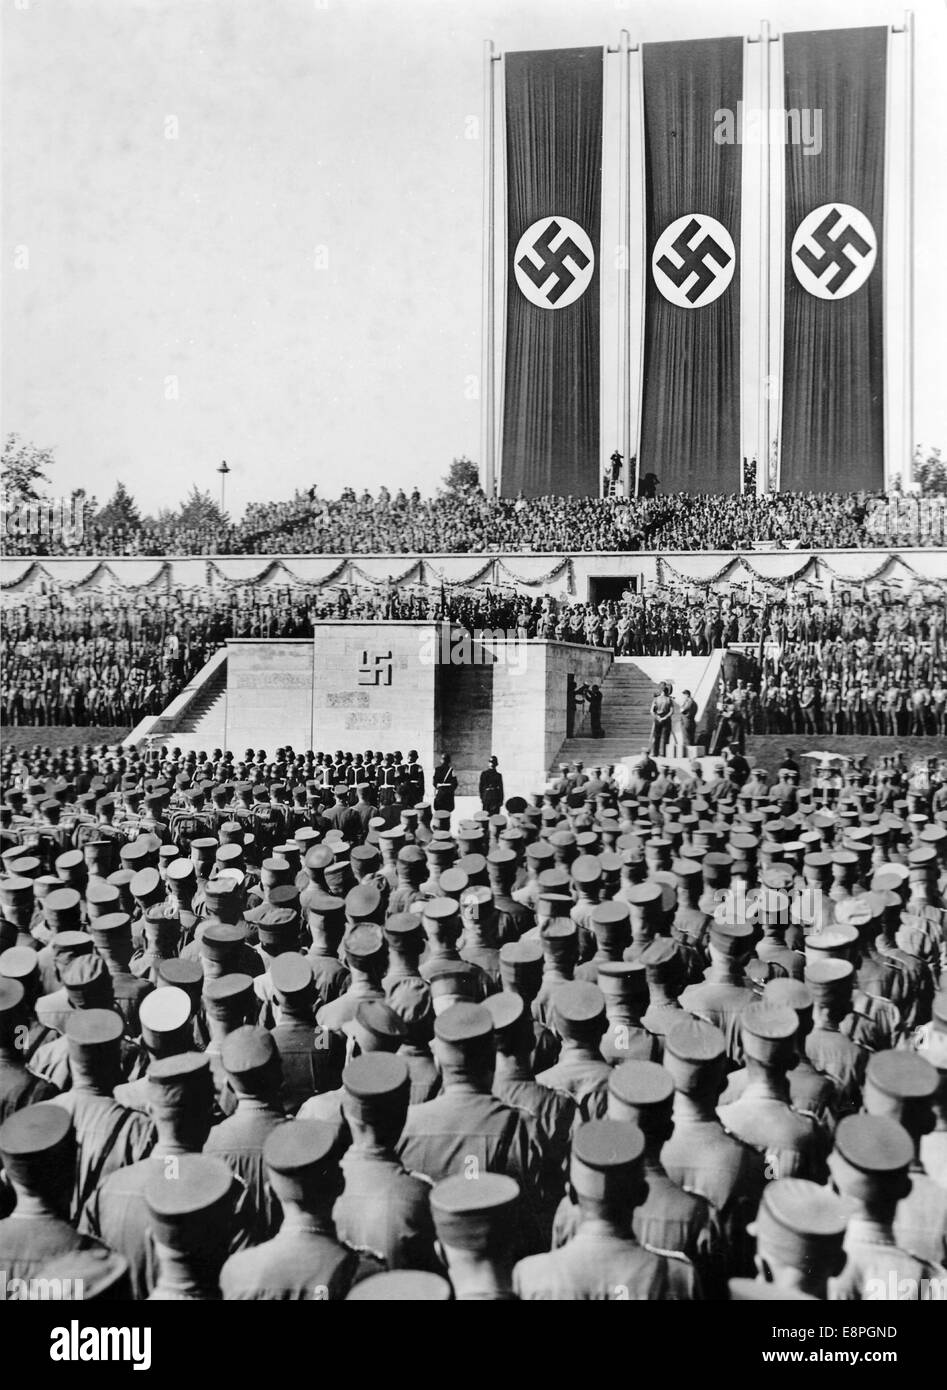 Nuremberg Rally 1936 in Nuremberg, Germany - Roll call of the Sturmabteilung (SA) on Zeppelin Field at the Nazi party rally grounds in front of Adolf Hitler. (Flaws in quality due to the historic picture copy) Fotoarchiv für Zeitgeschichtee - NO WIRE SERVICE – Stock Photo